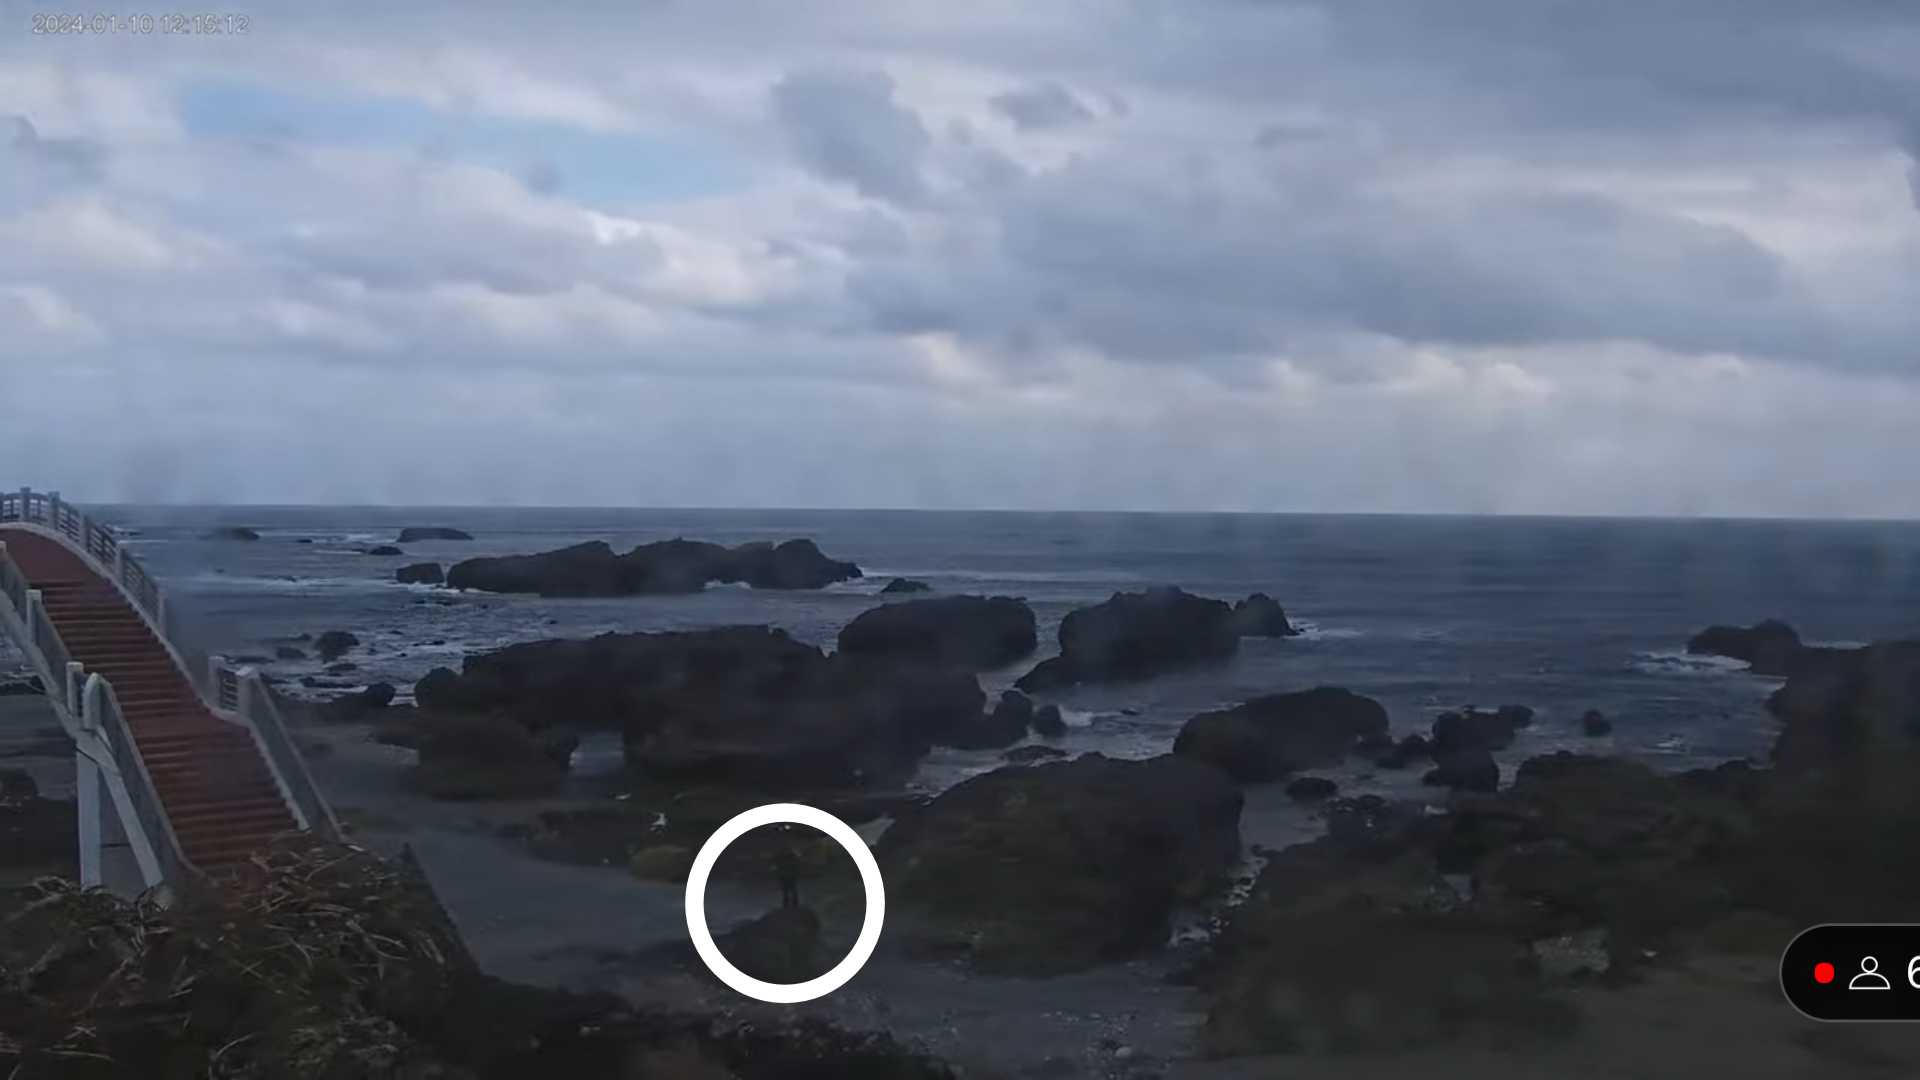 Screenshot of a webcam image of a man standing on a rock next to the Sanxiantai Bridge in Taiwan. In the lower-right corner is a graphic indicating six people were watching at that moment.